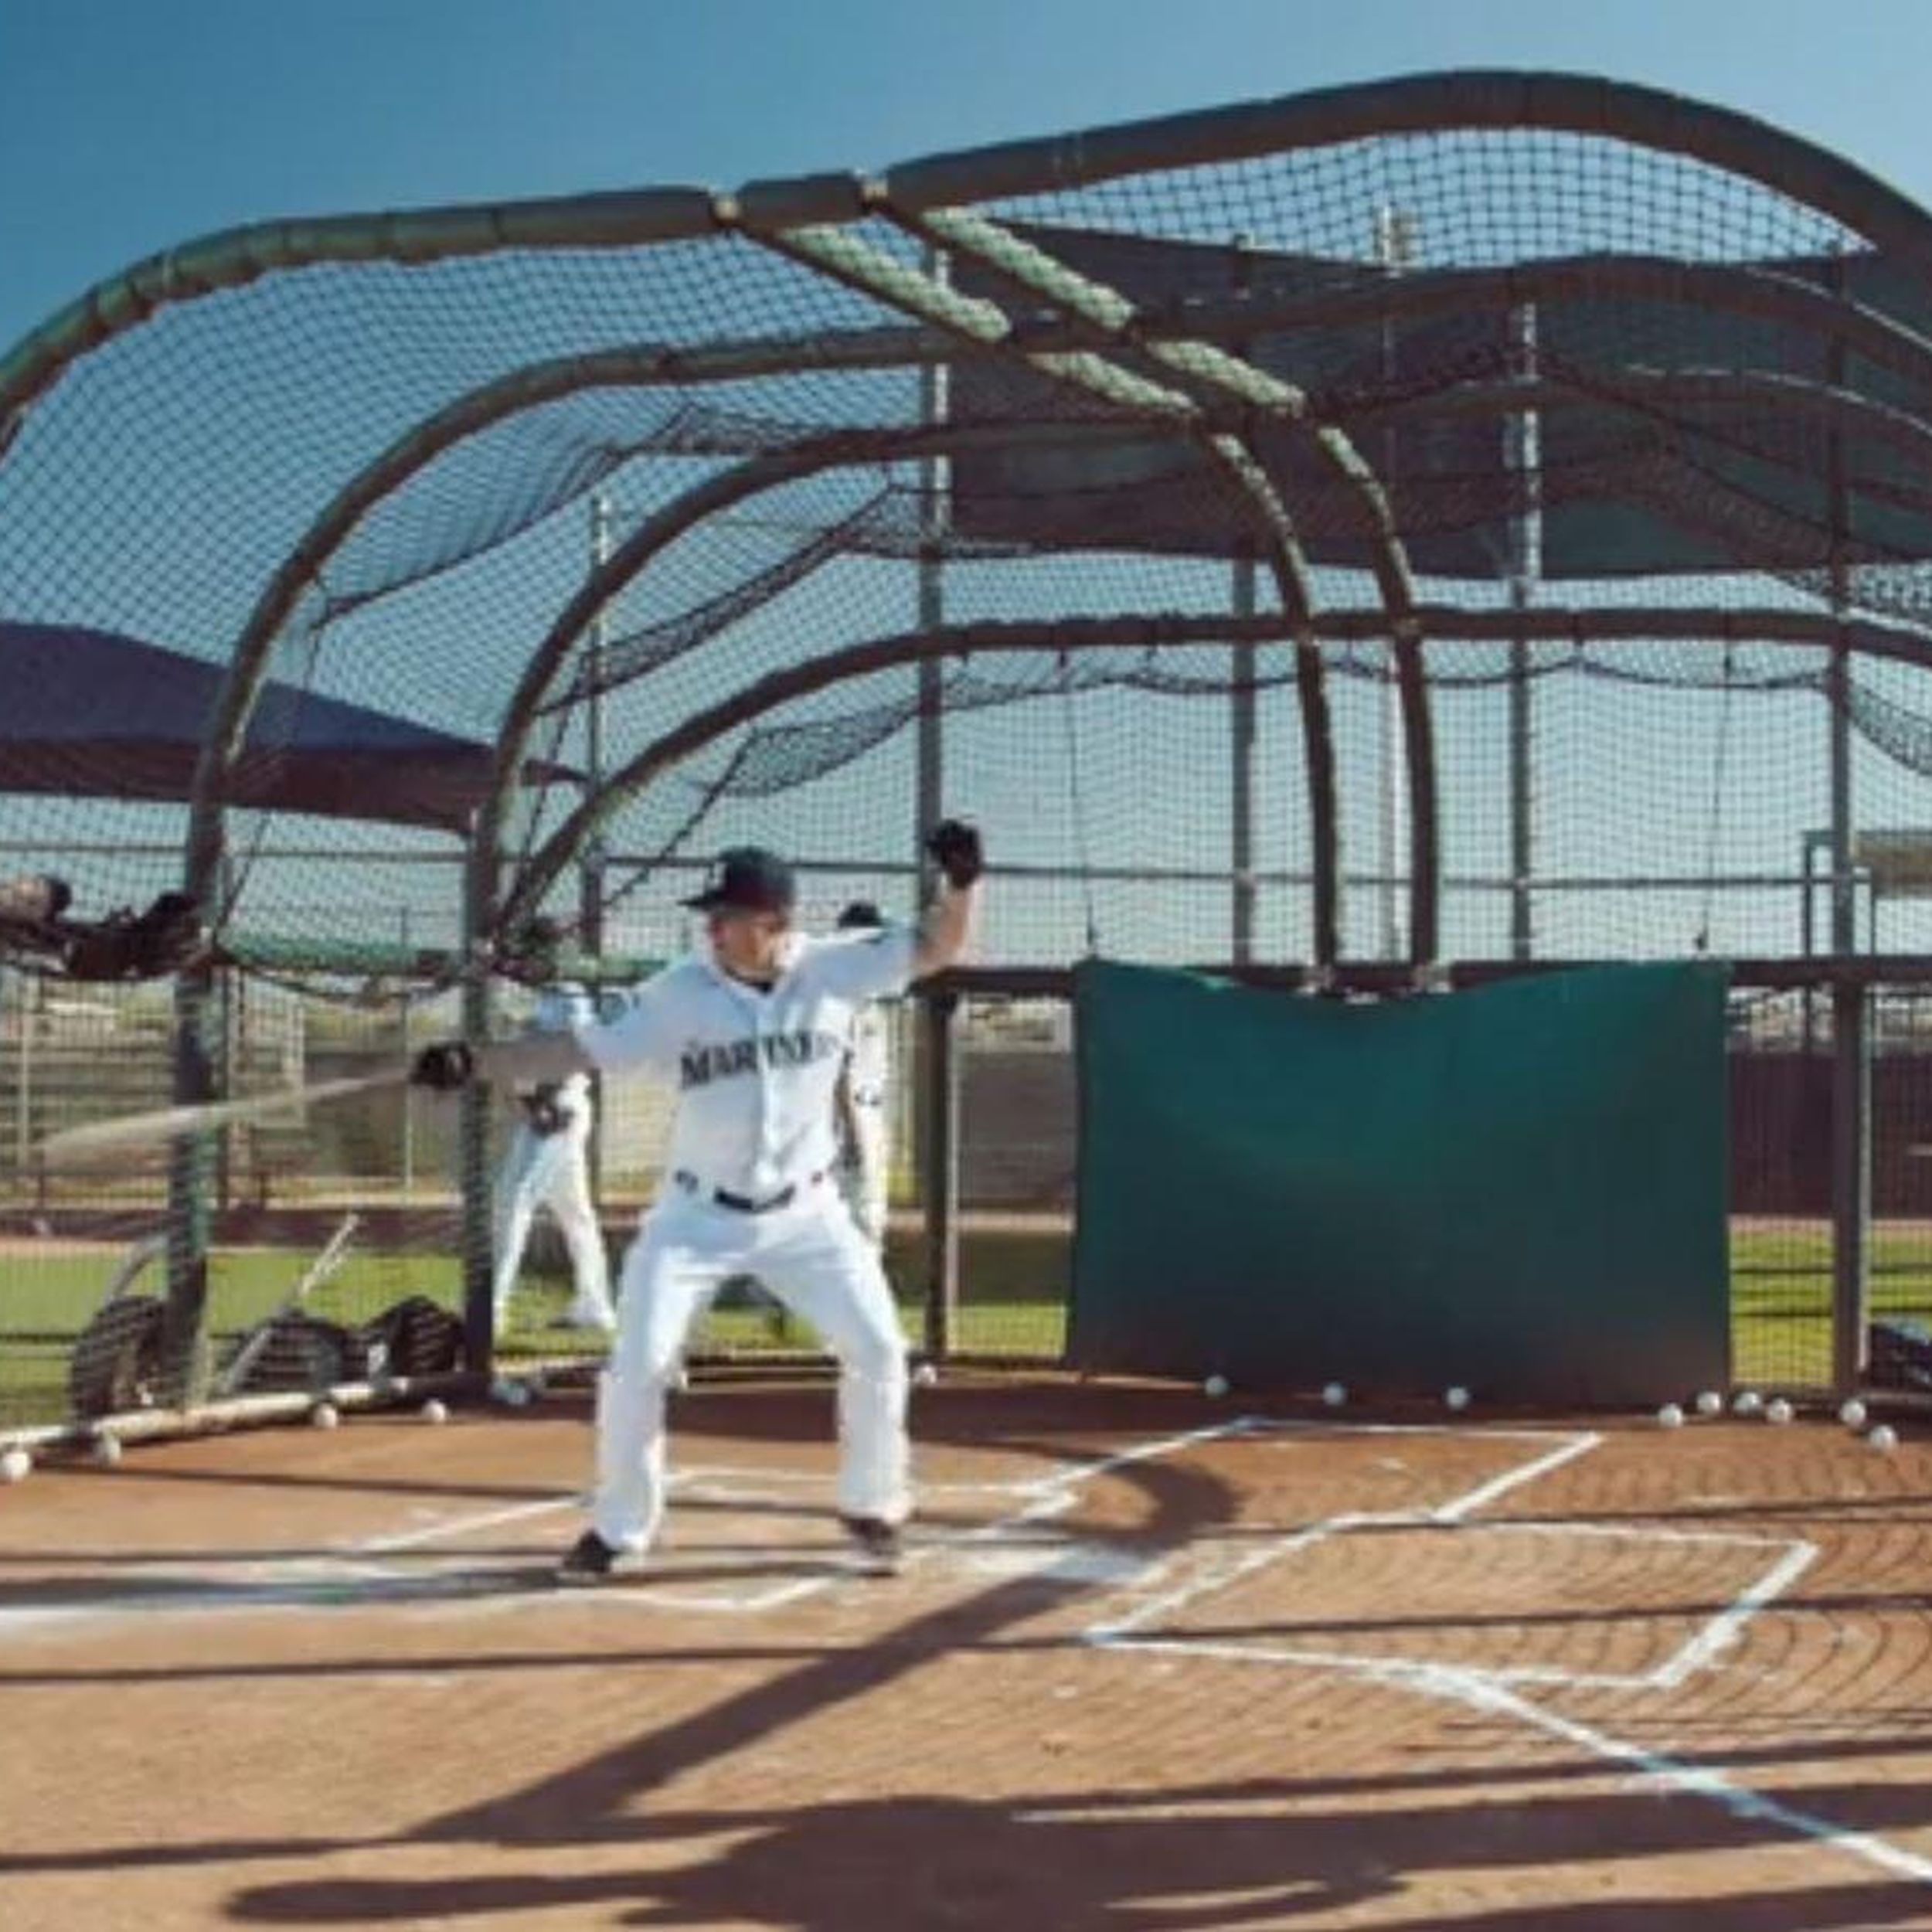 Watch Kyle Seager try (and fail) at a hair flip in the latest Mariners  commercial